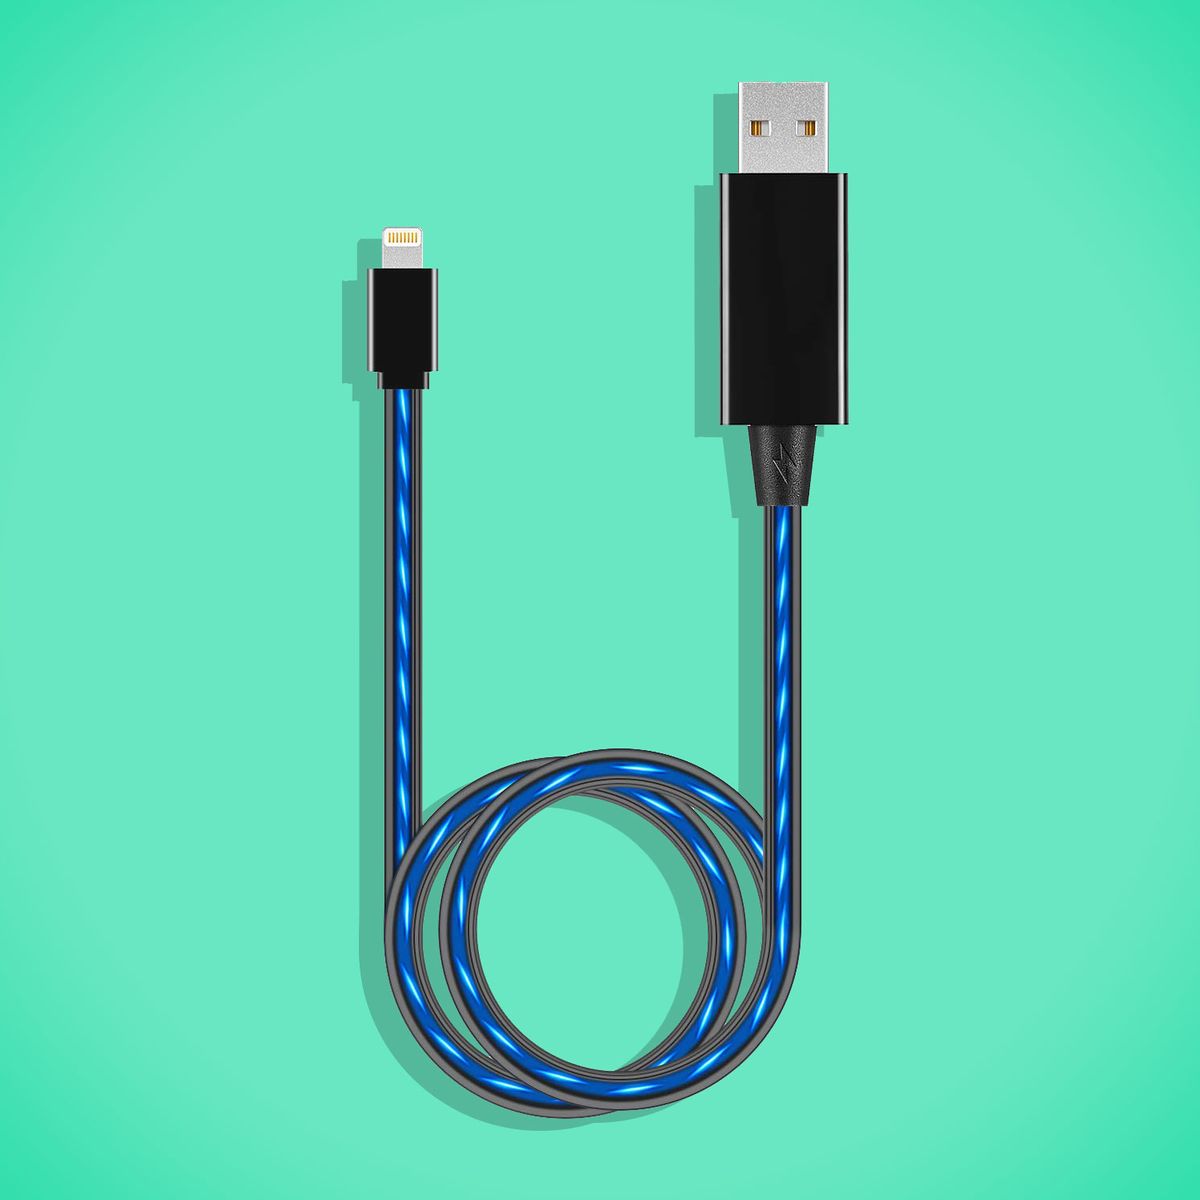 El-Aurora Lightning Charger Cable Review 2019 | The Strategist